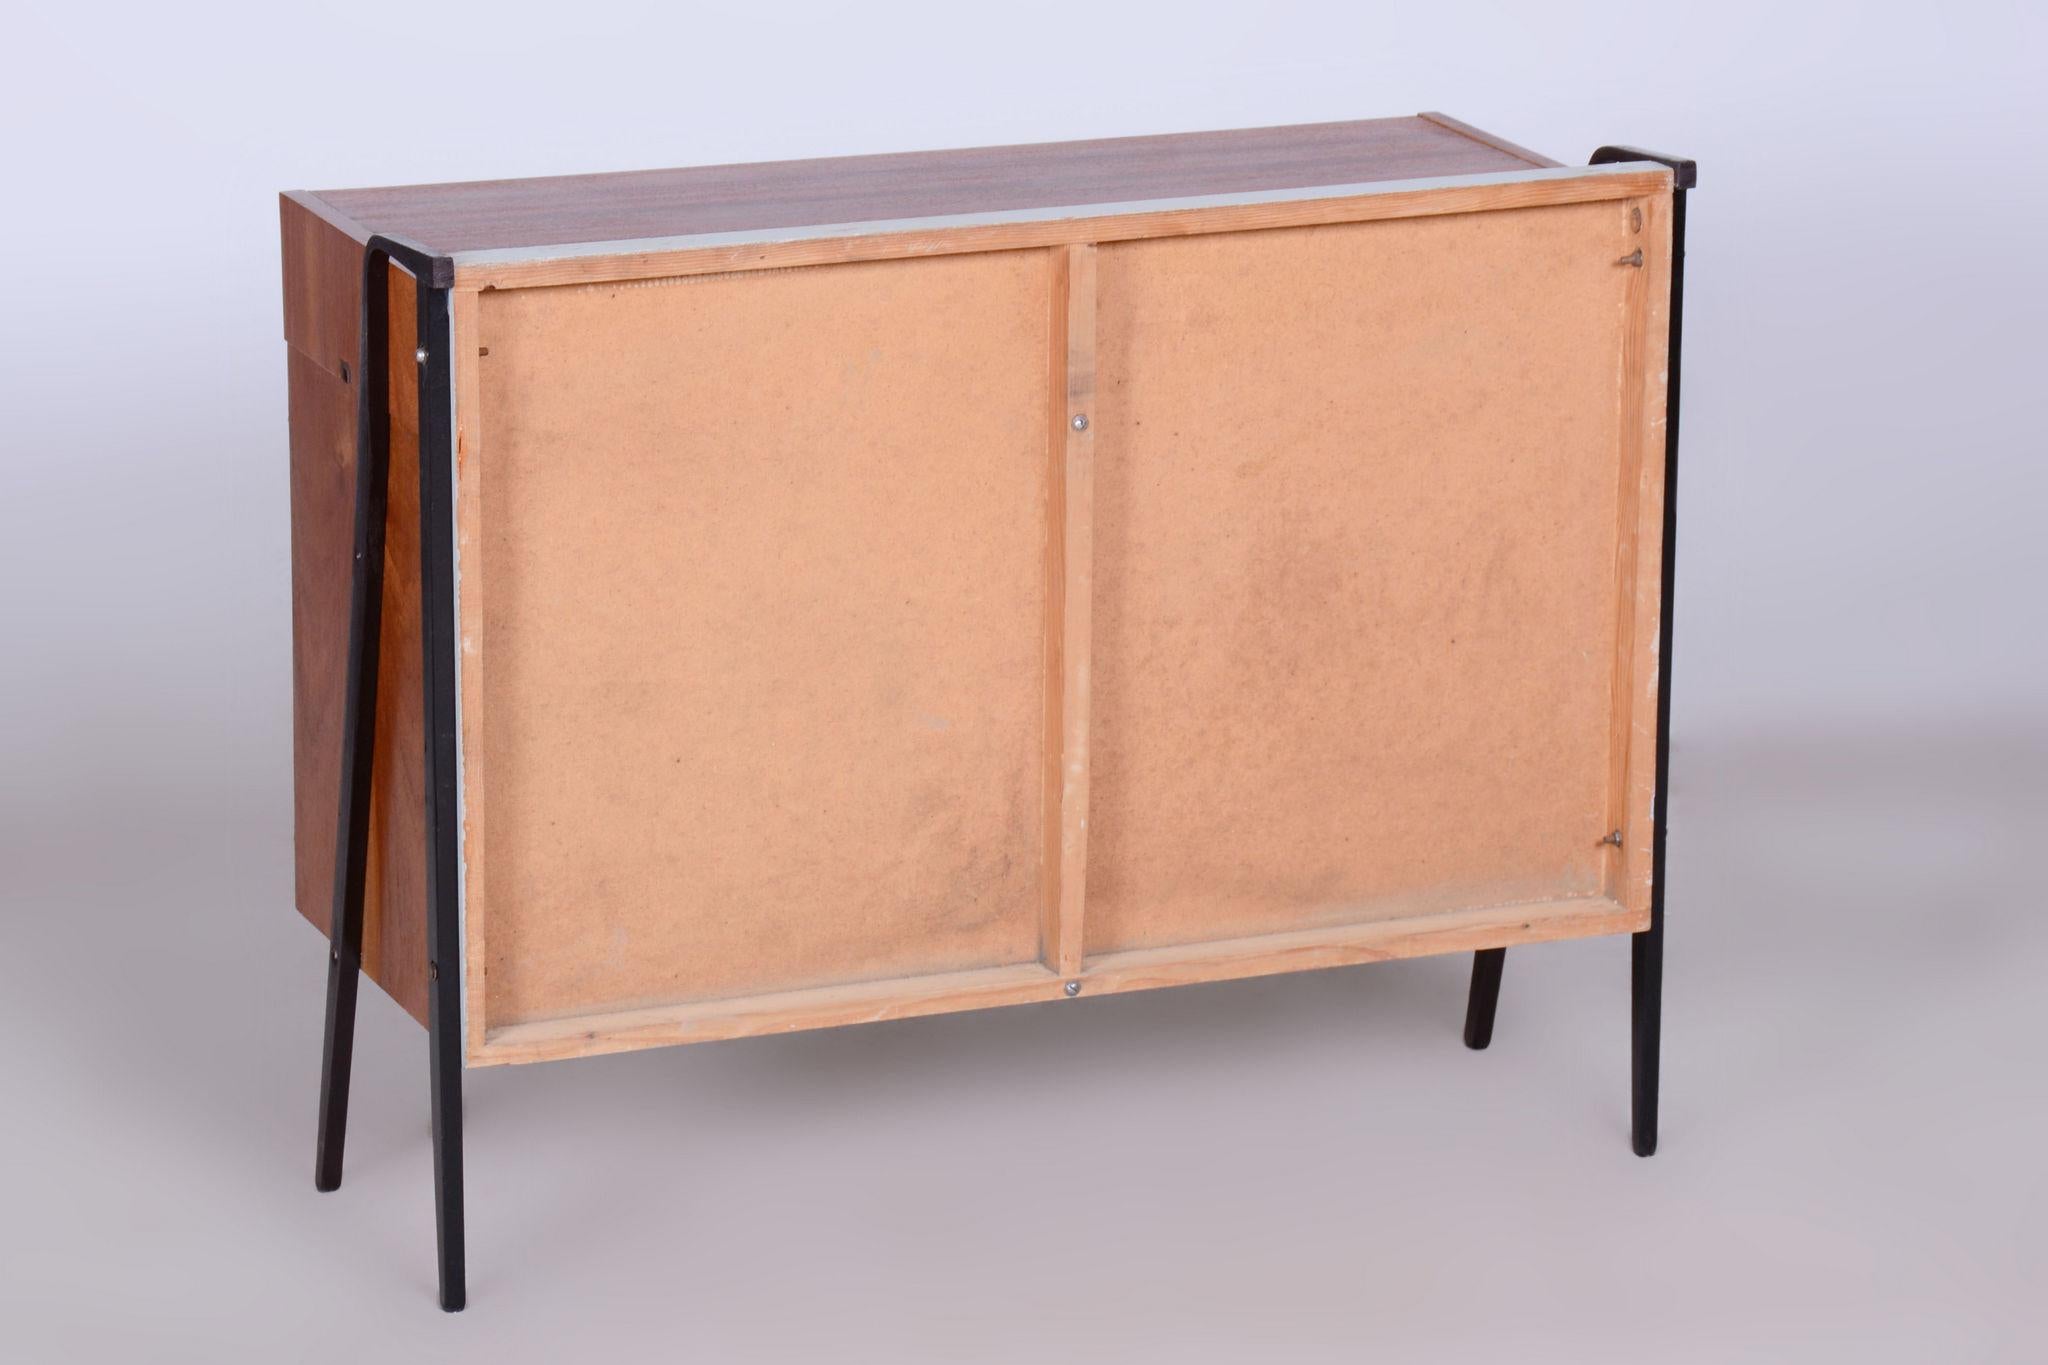 Restored MidCentury Cabinet Set, Mahogany, Revived Polish, Central Europe, 1950s For Sale 2